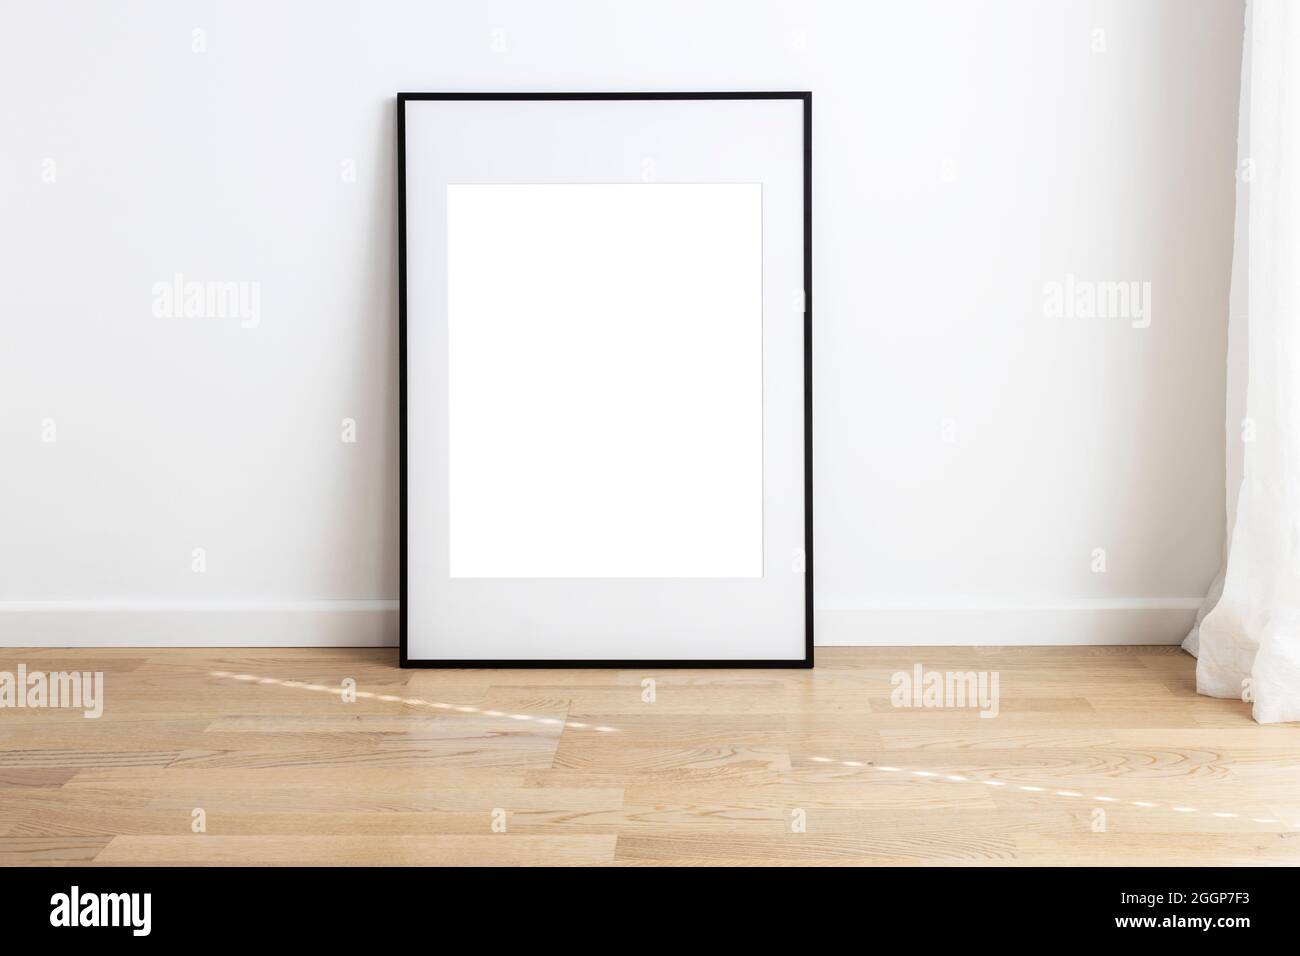 Rectangular mock up frame with passepartou standing in a room with wooden flooring. Stock Photo